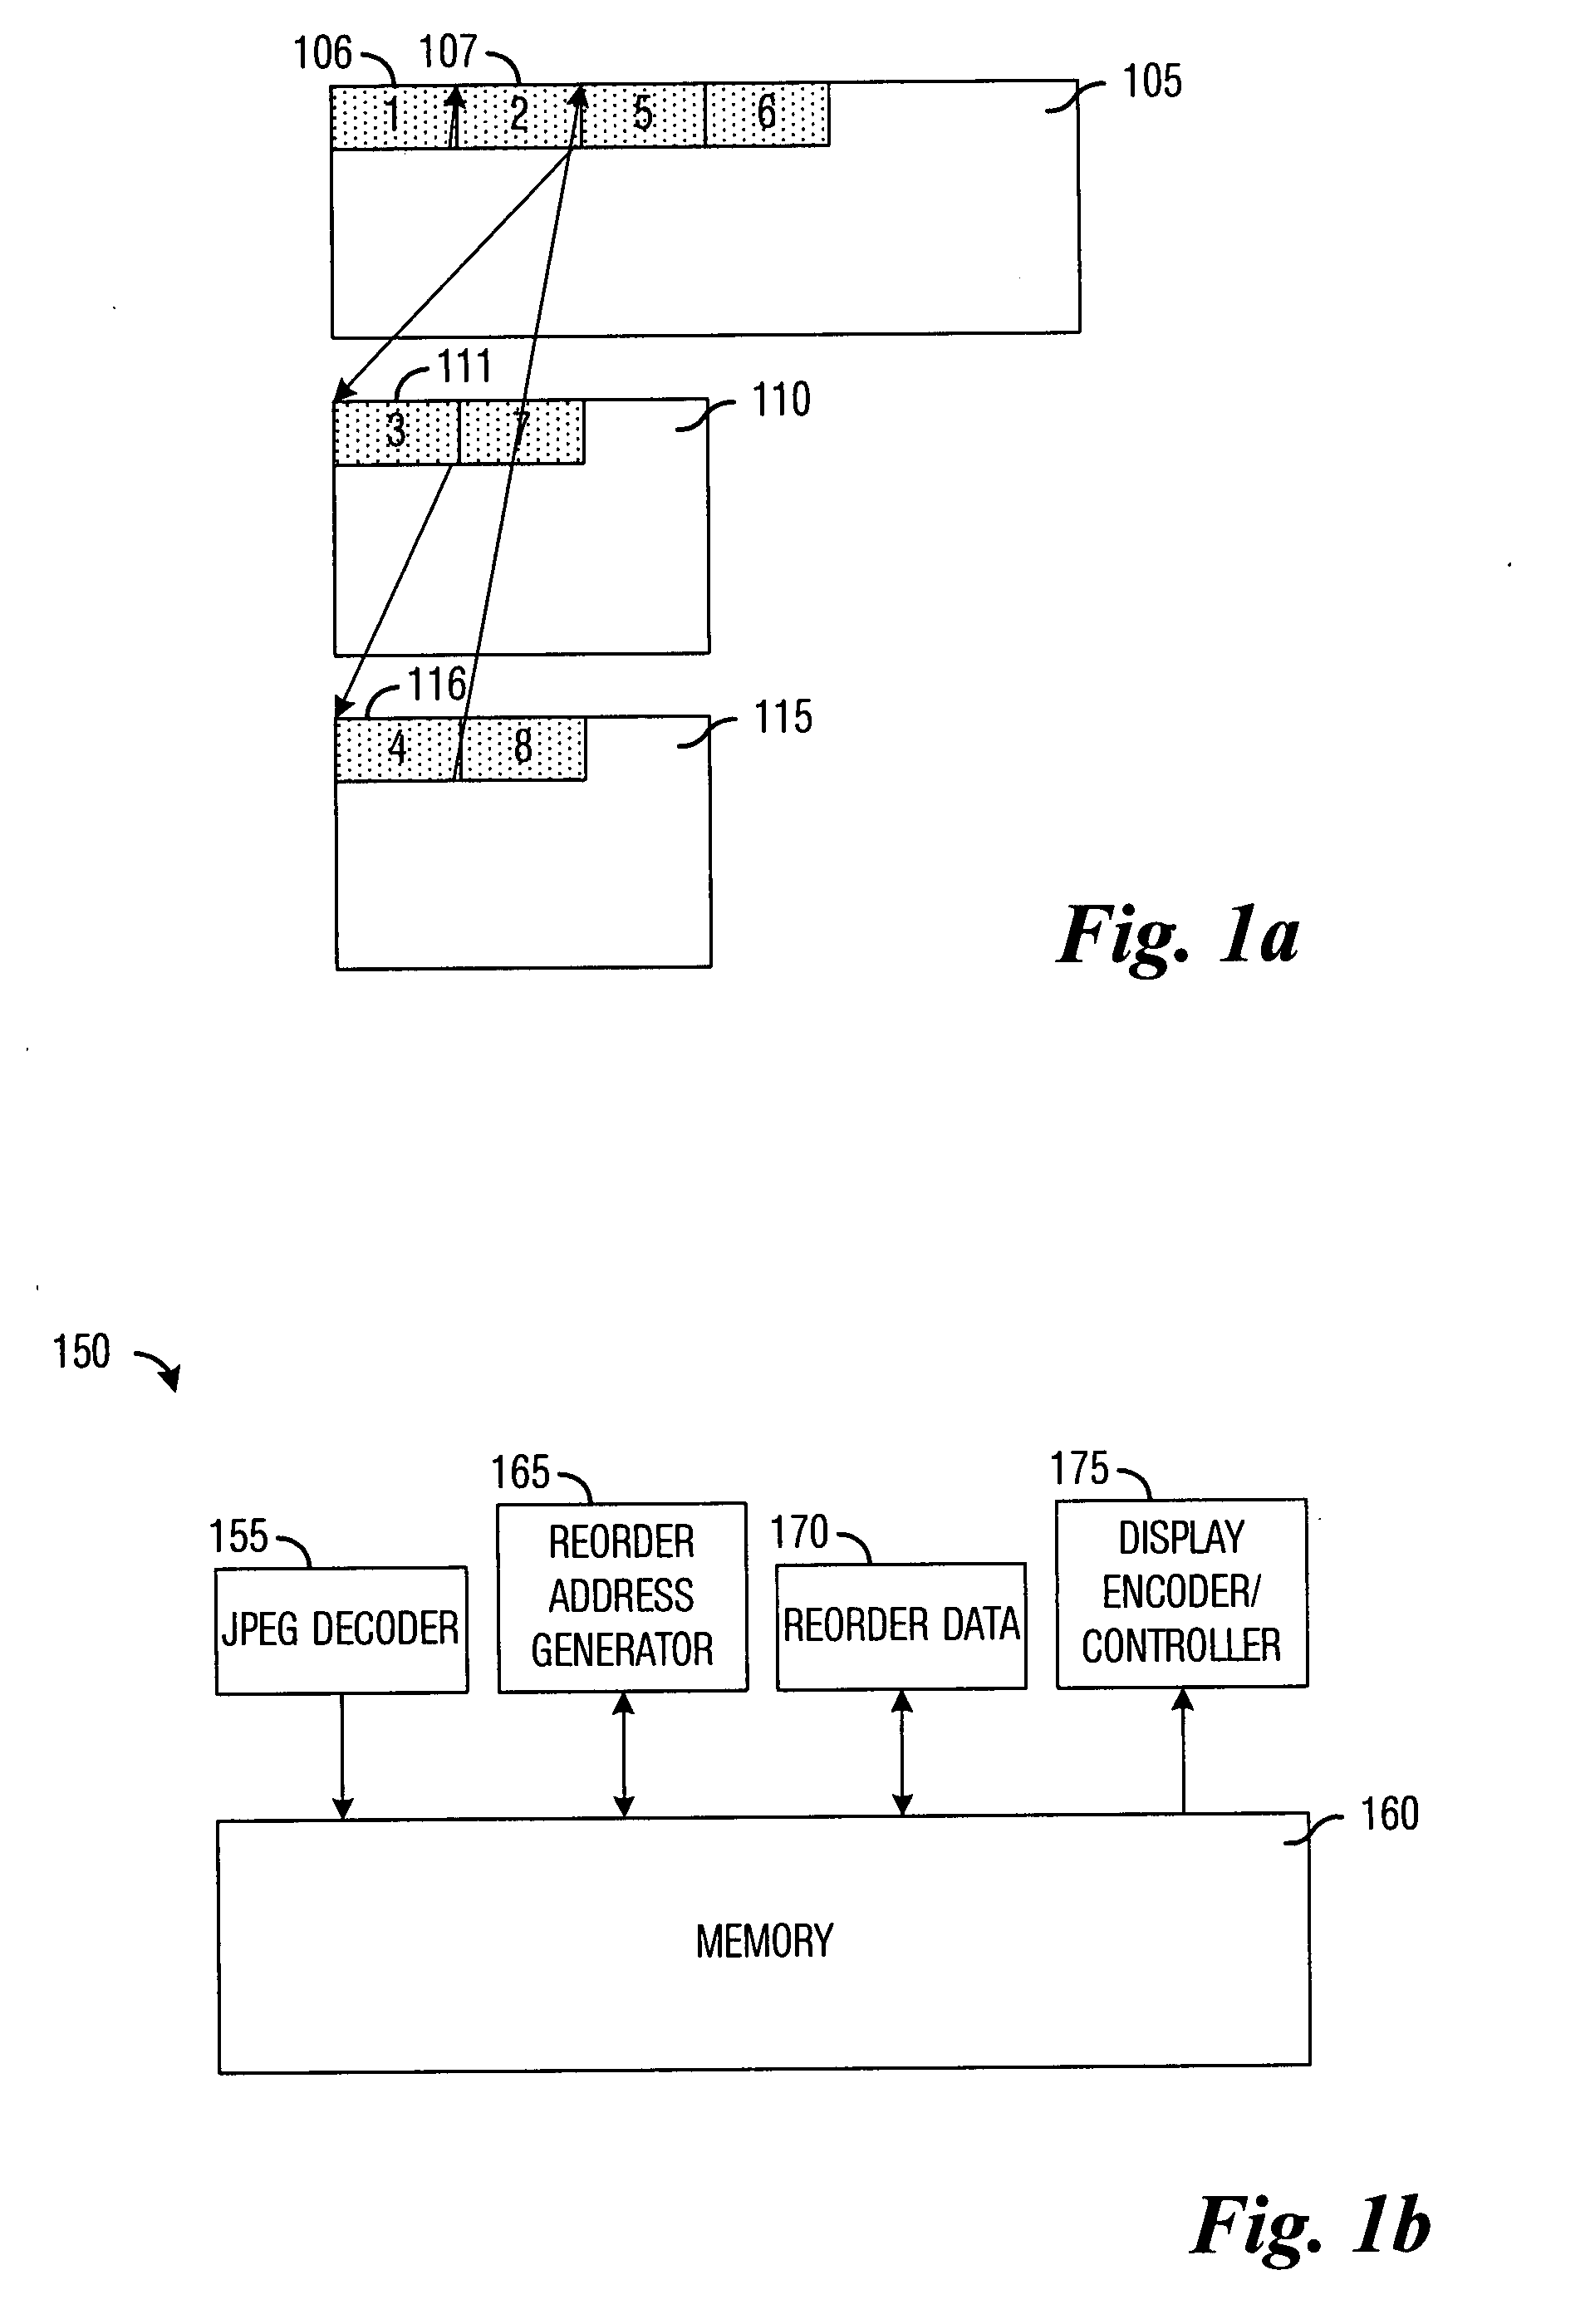 System and method for decoding and viewing of image files